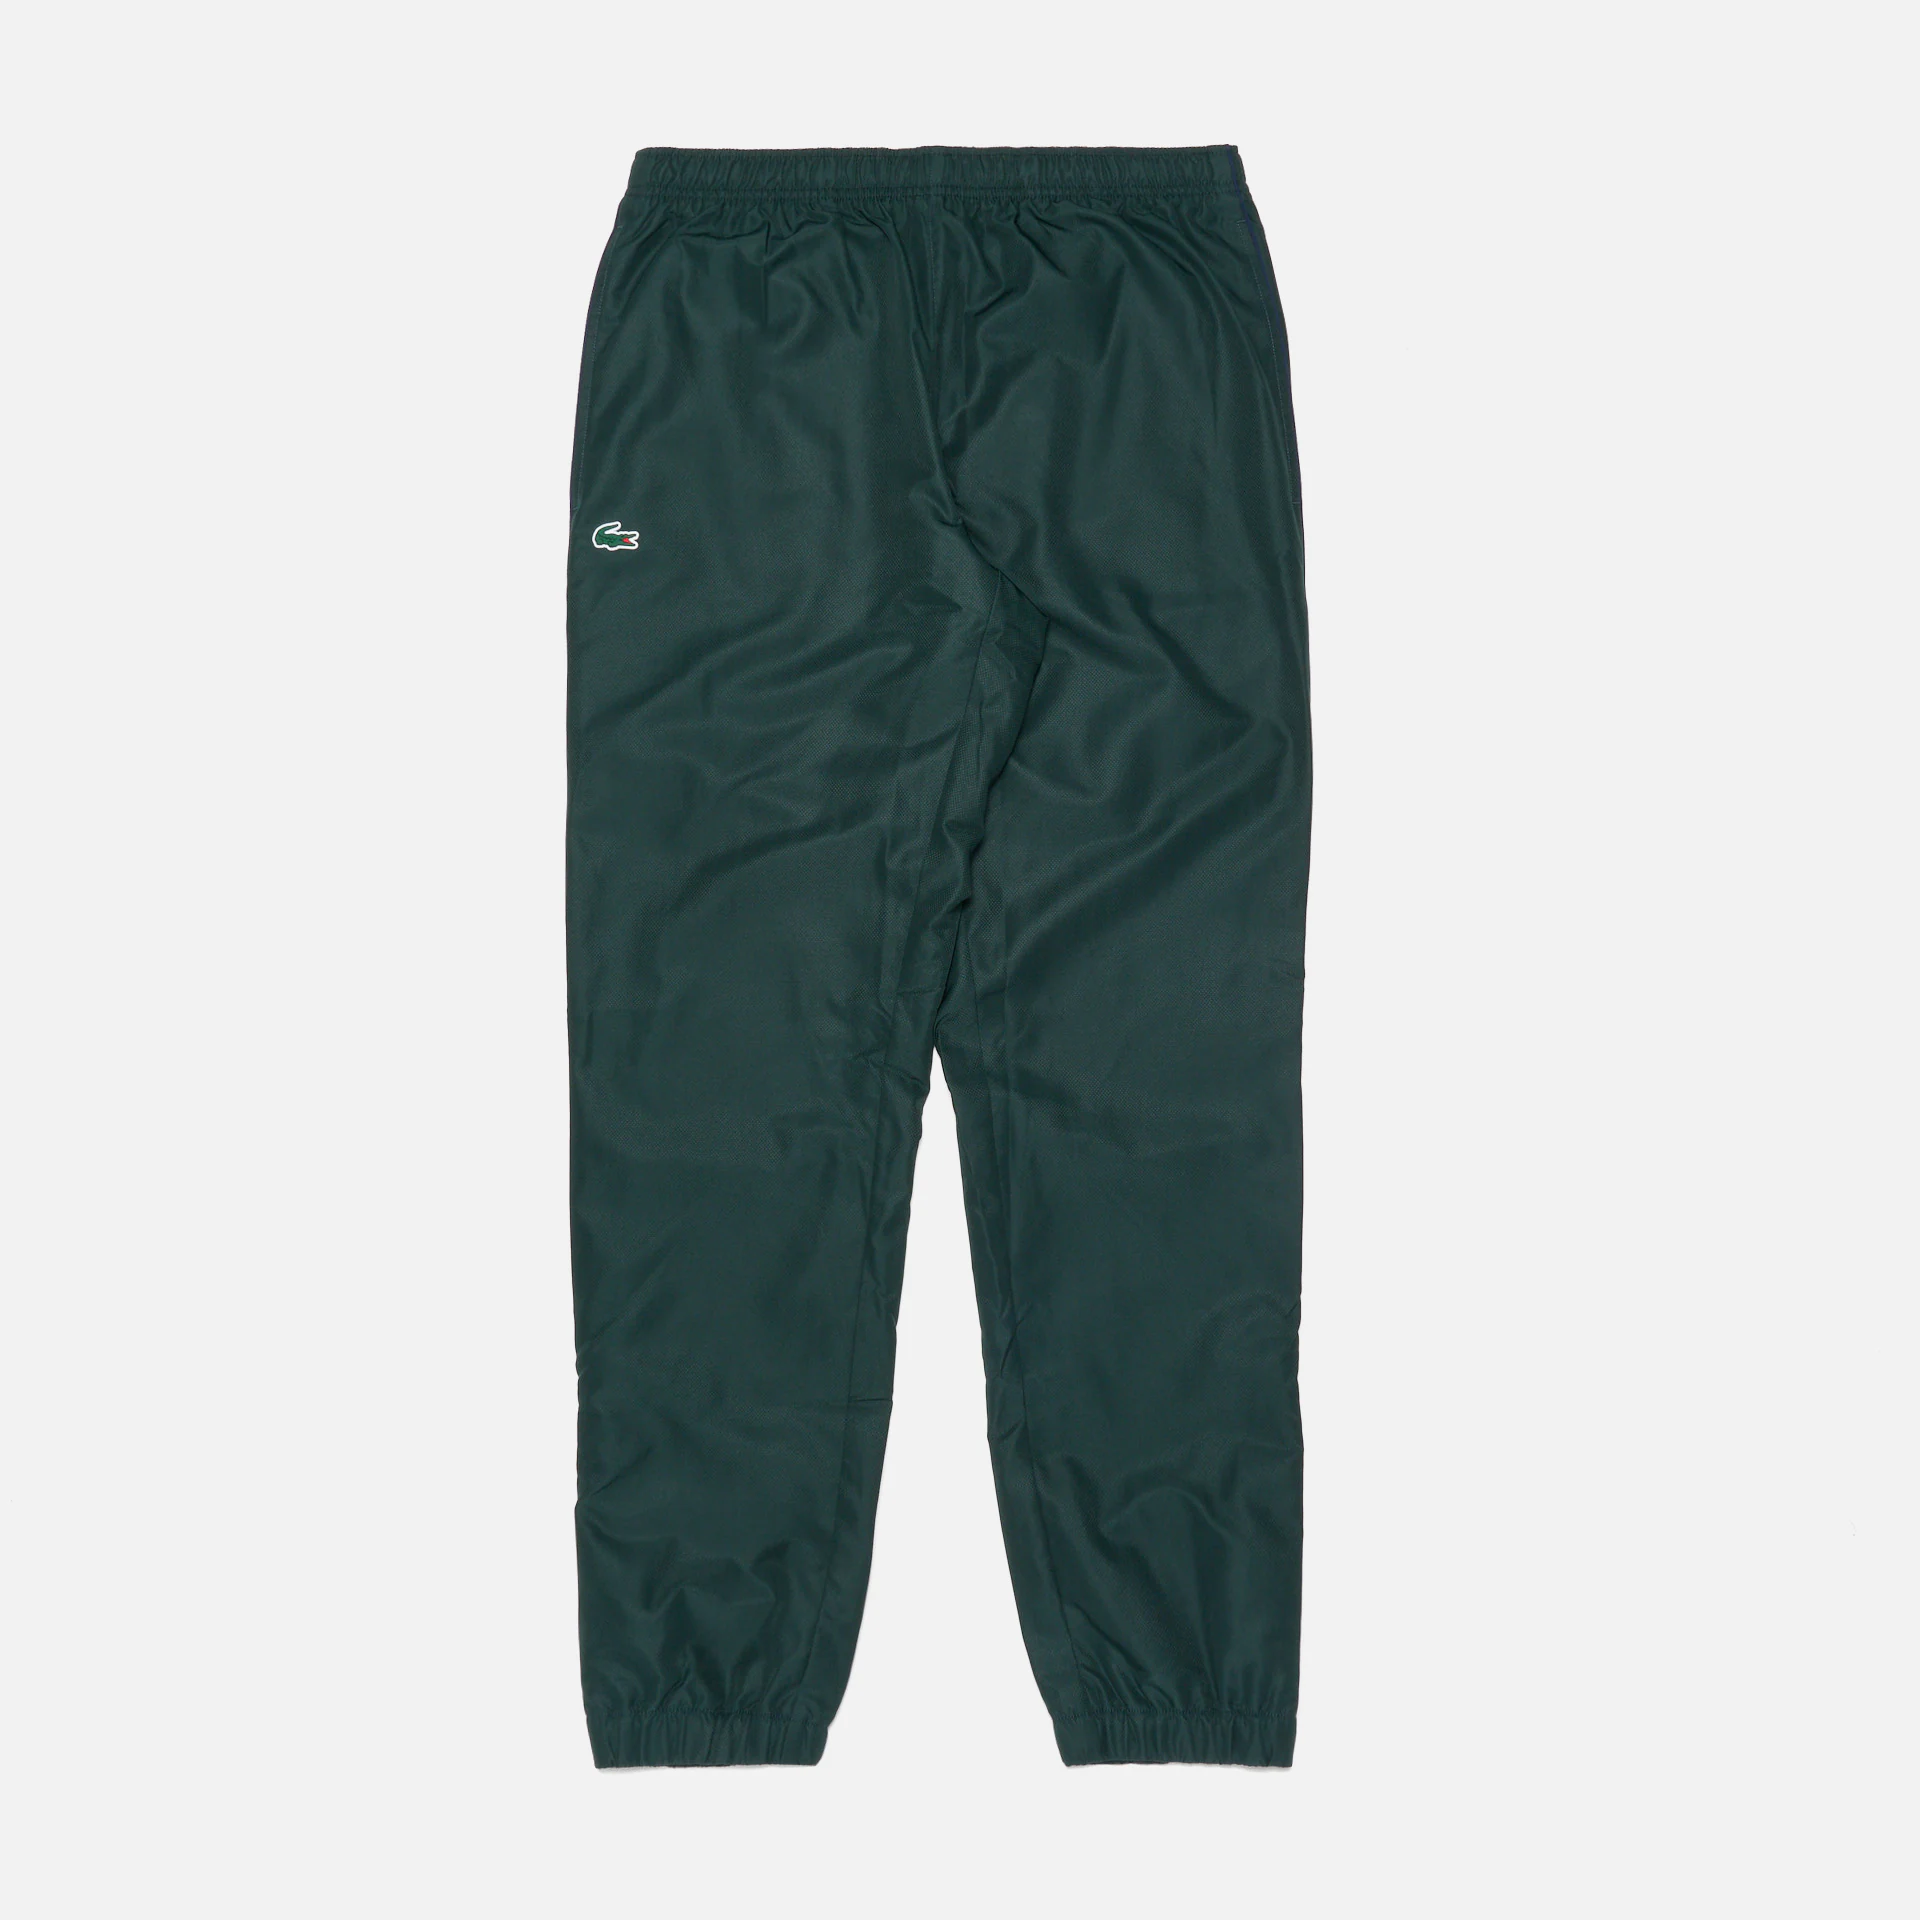 Lacoste Recycled Fabric Tennis Tracksuit Sinople